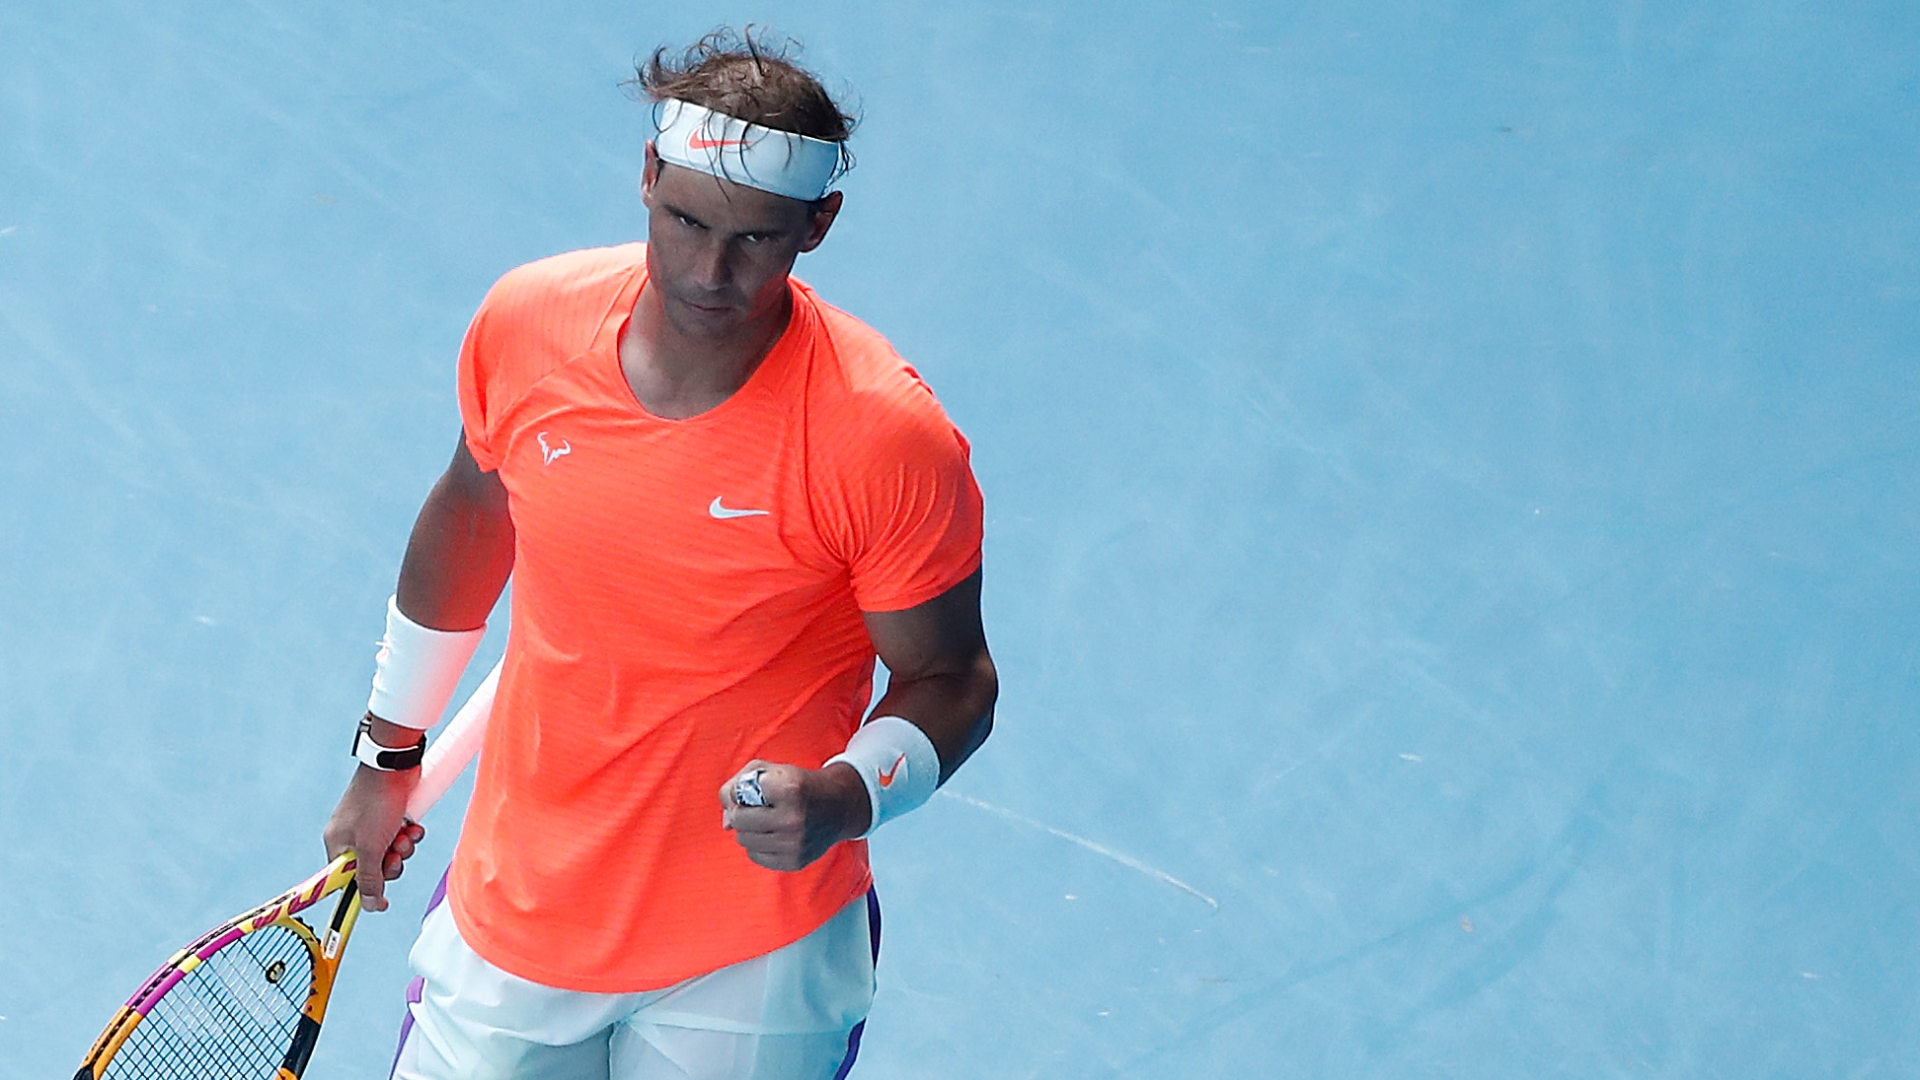 Nadal cruises by Fognini and into Aussie quarterfinals